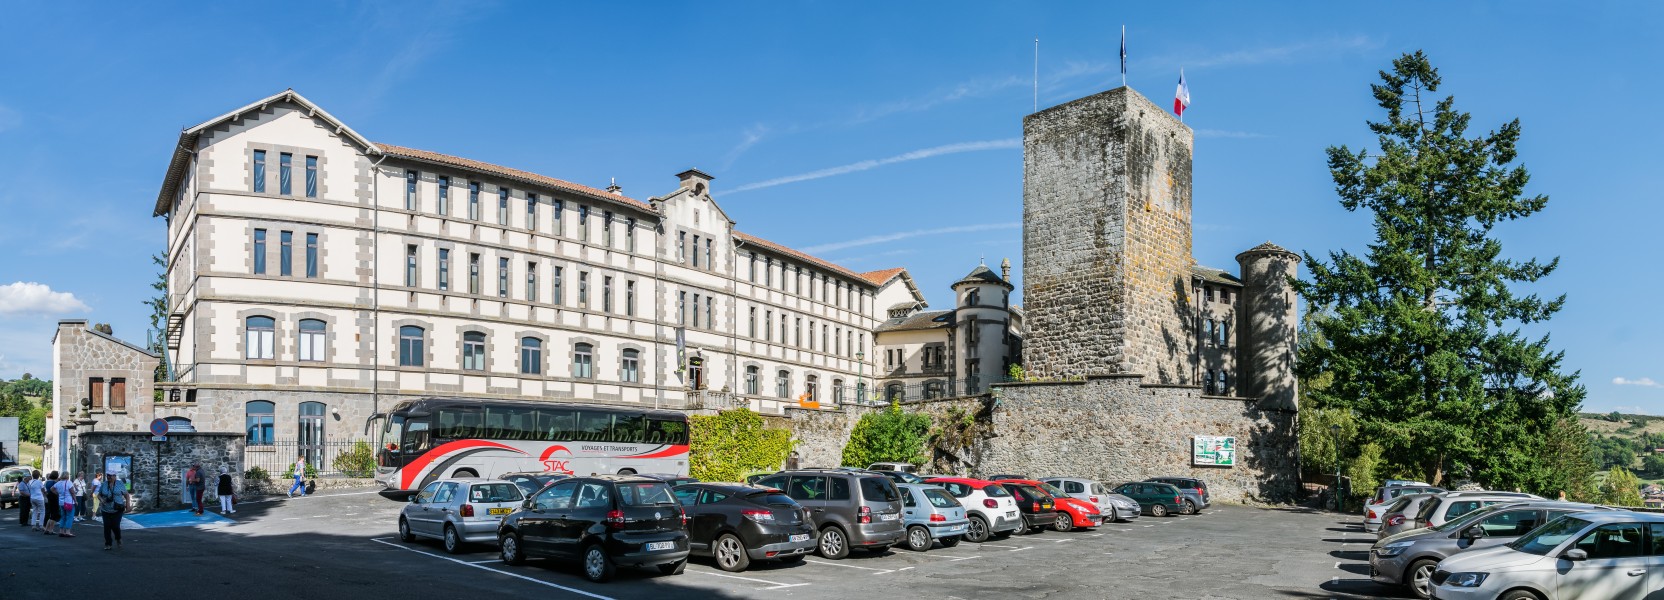 Museum of Volcanoes and Saint Stephen Castle in Aurillac